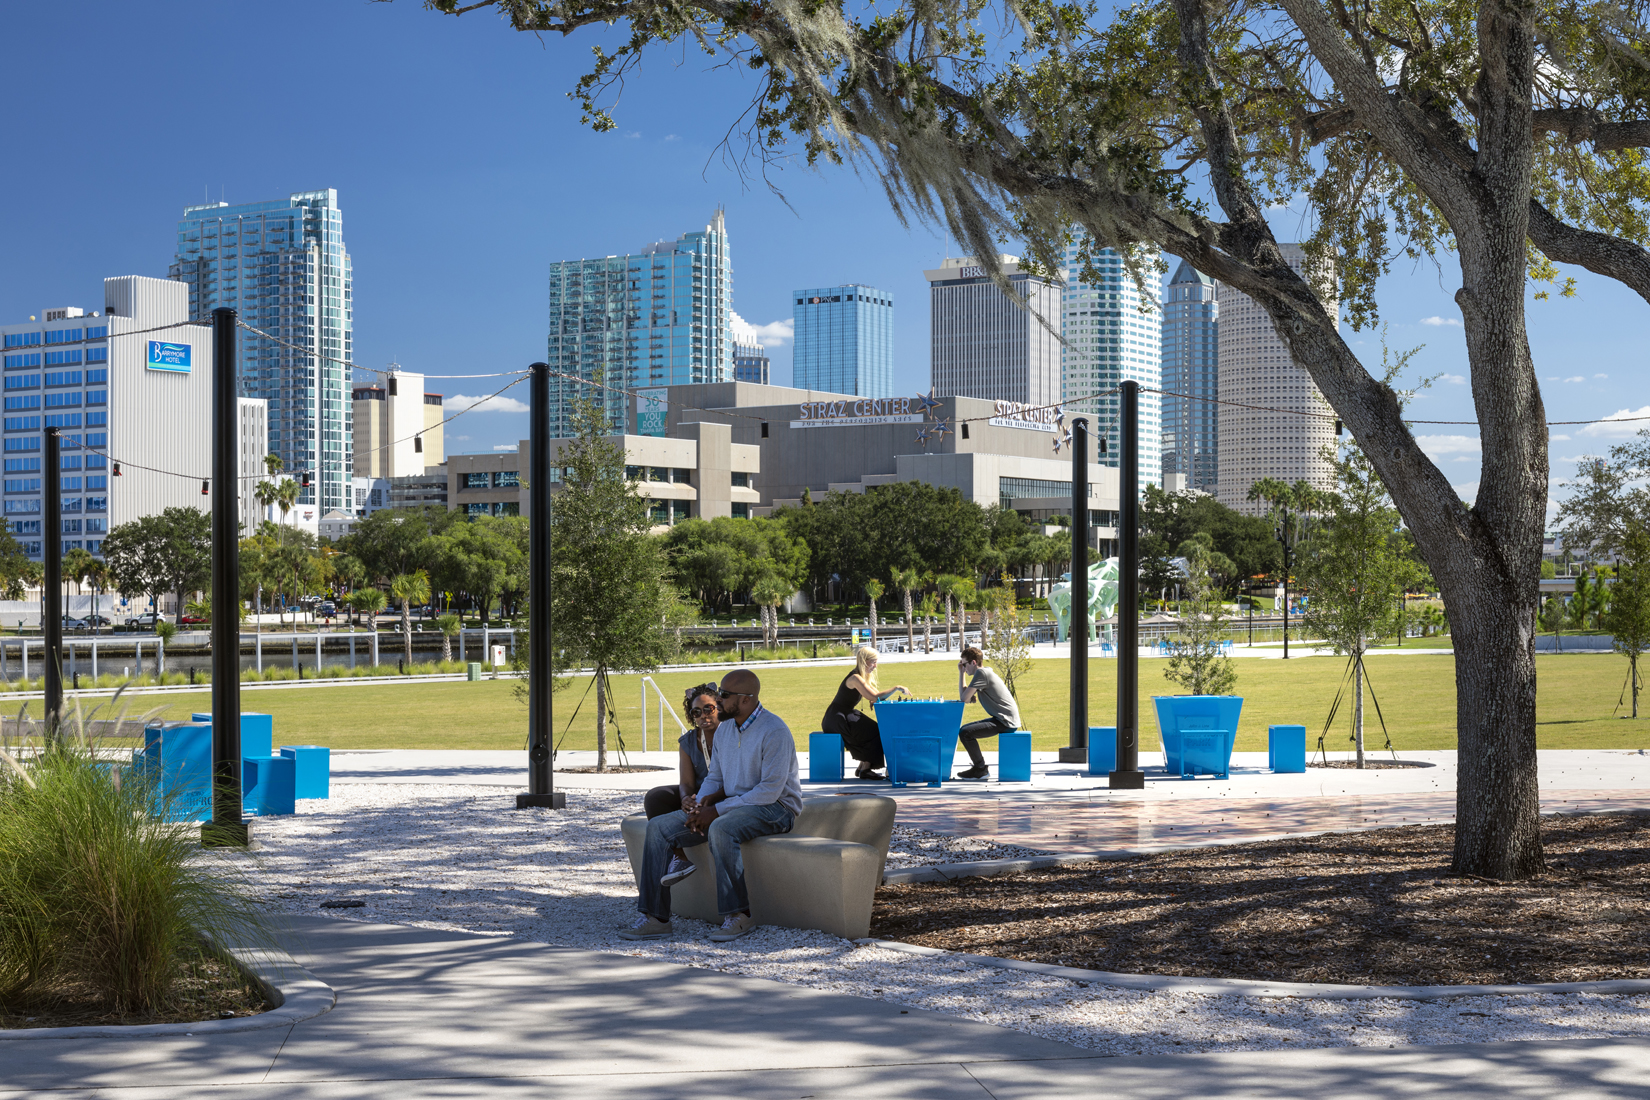 City views from a grand lawn for gathering were a request from the West Tampa community for the Civitas design of the park, which retains more than 100 live oak trees (photo: Albert Vecerka).